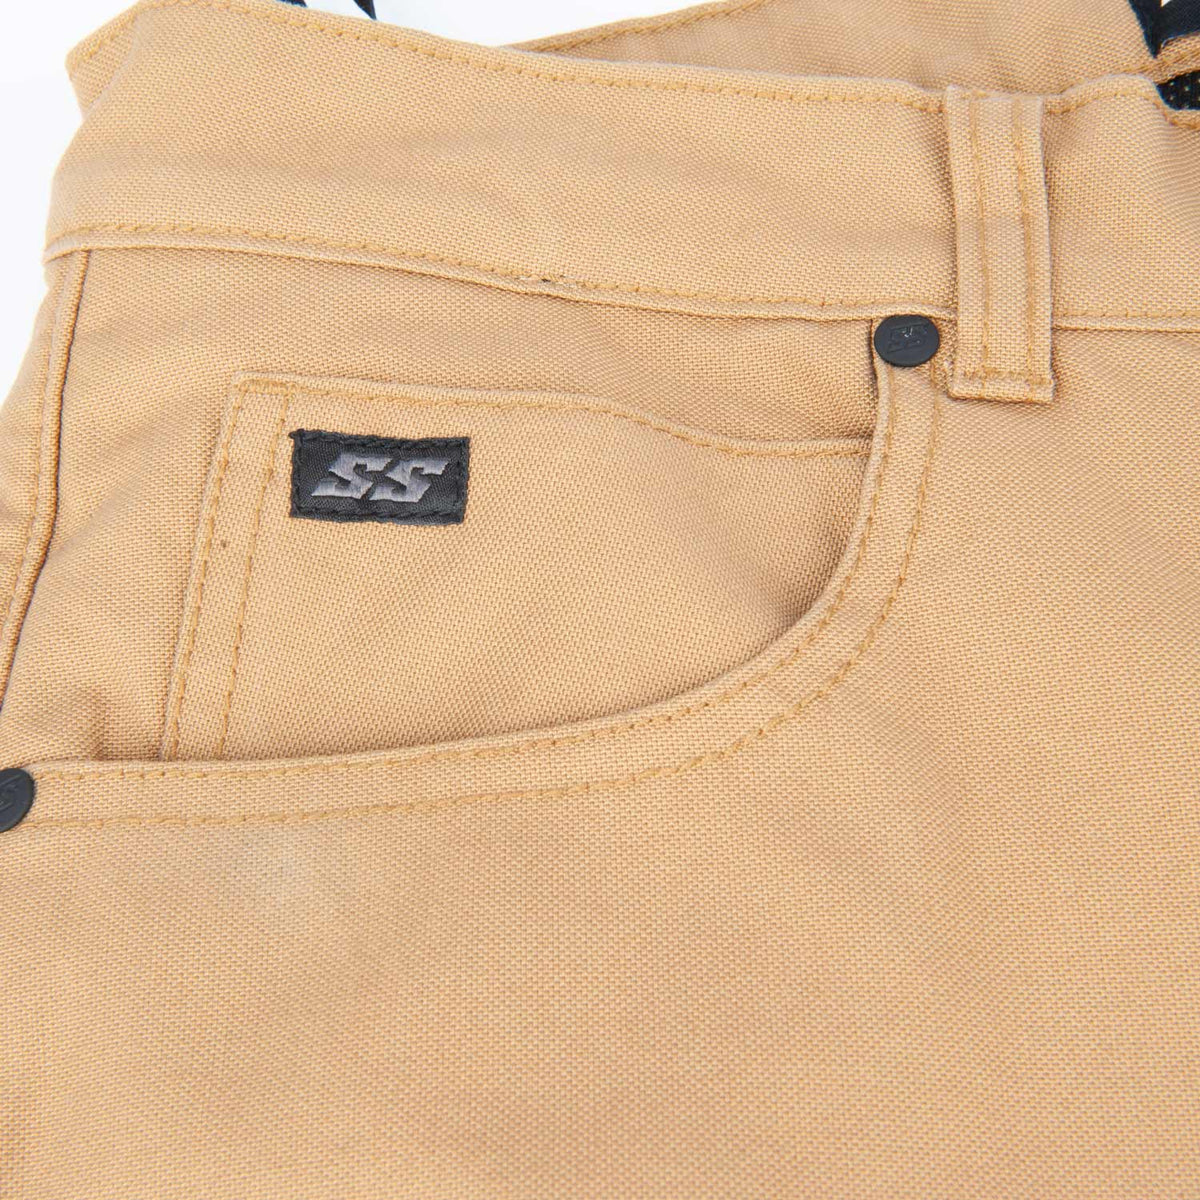 Off the Chain™ Reinforced/Armoured Chino